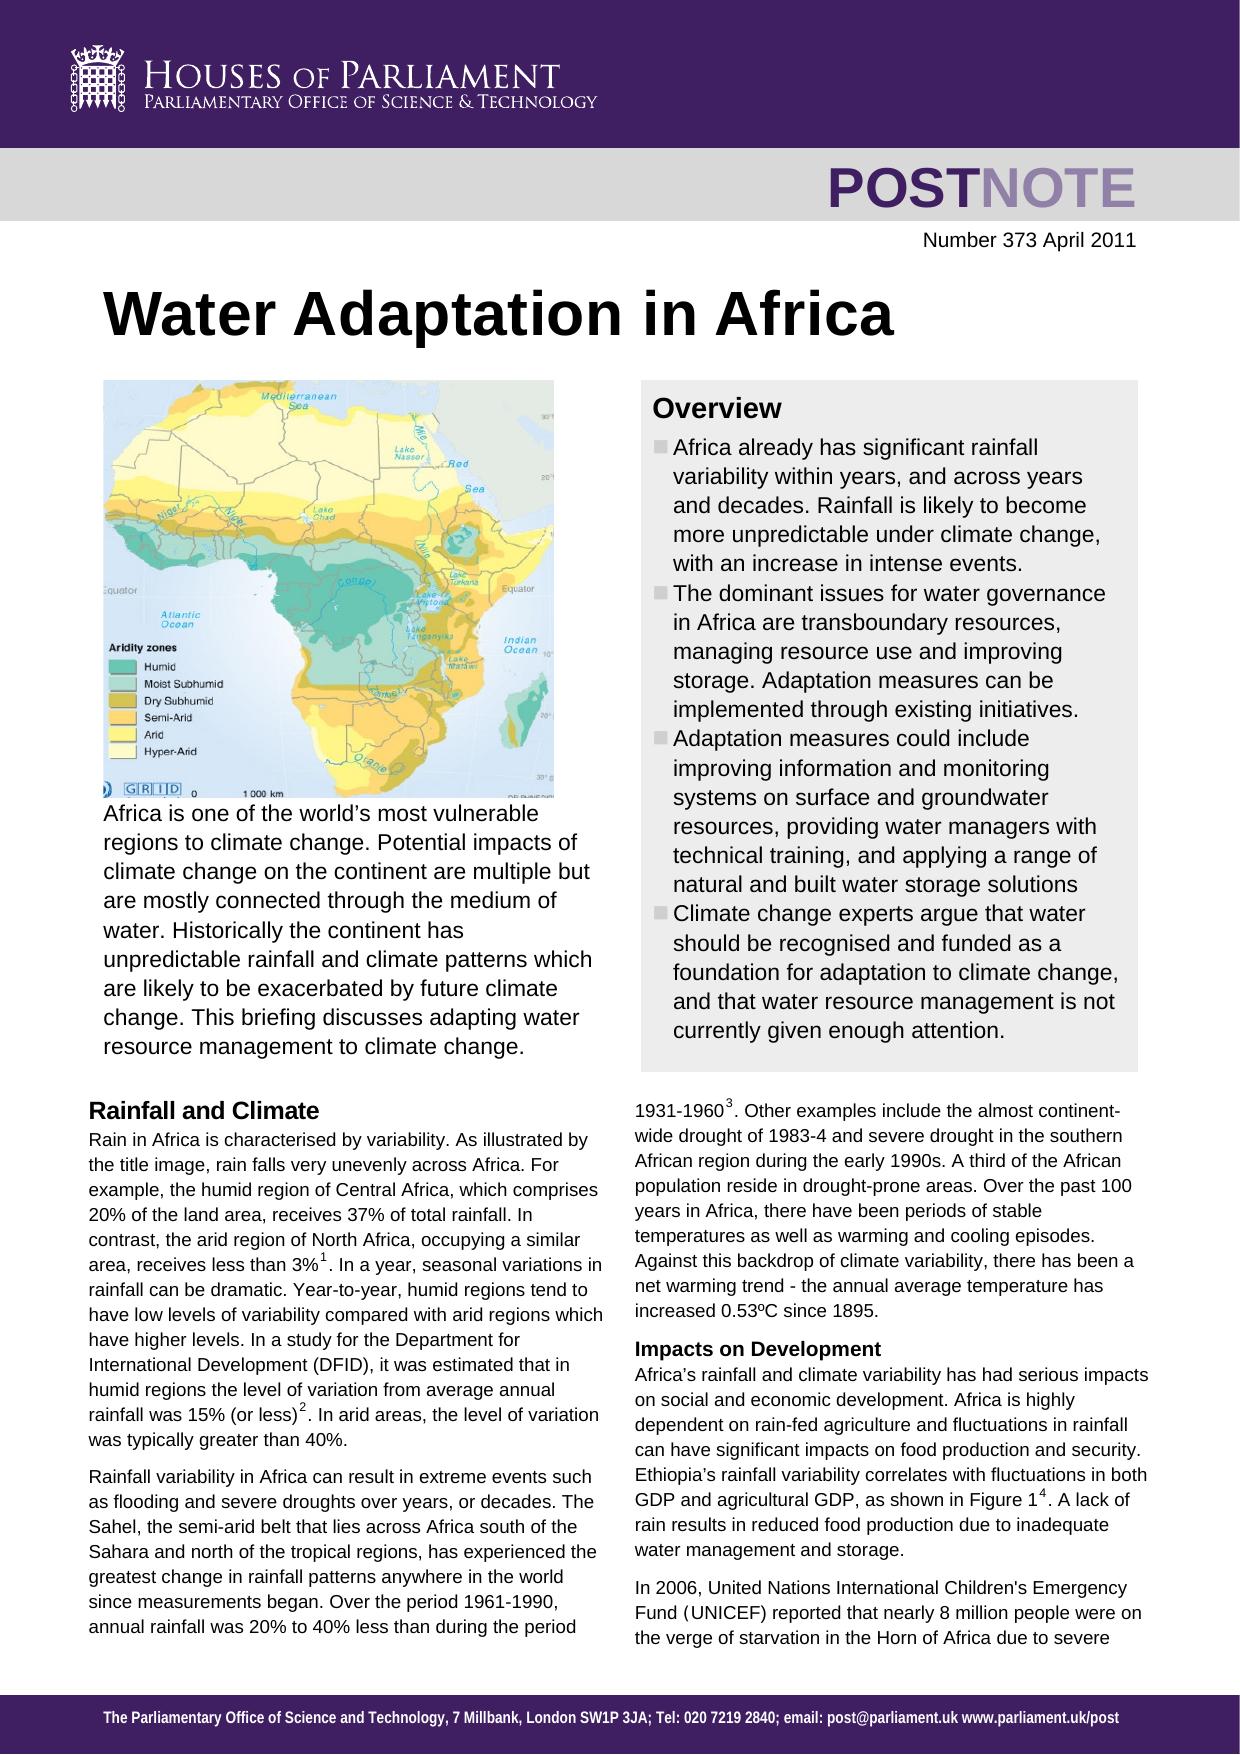 Water-Adapatation-in-Africa, 2011